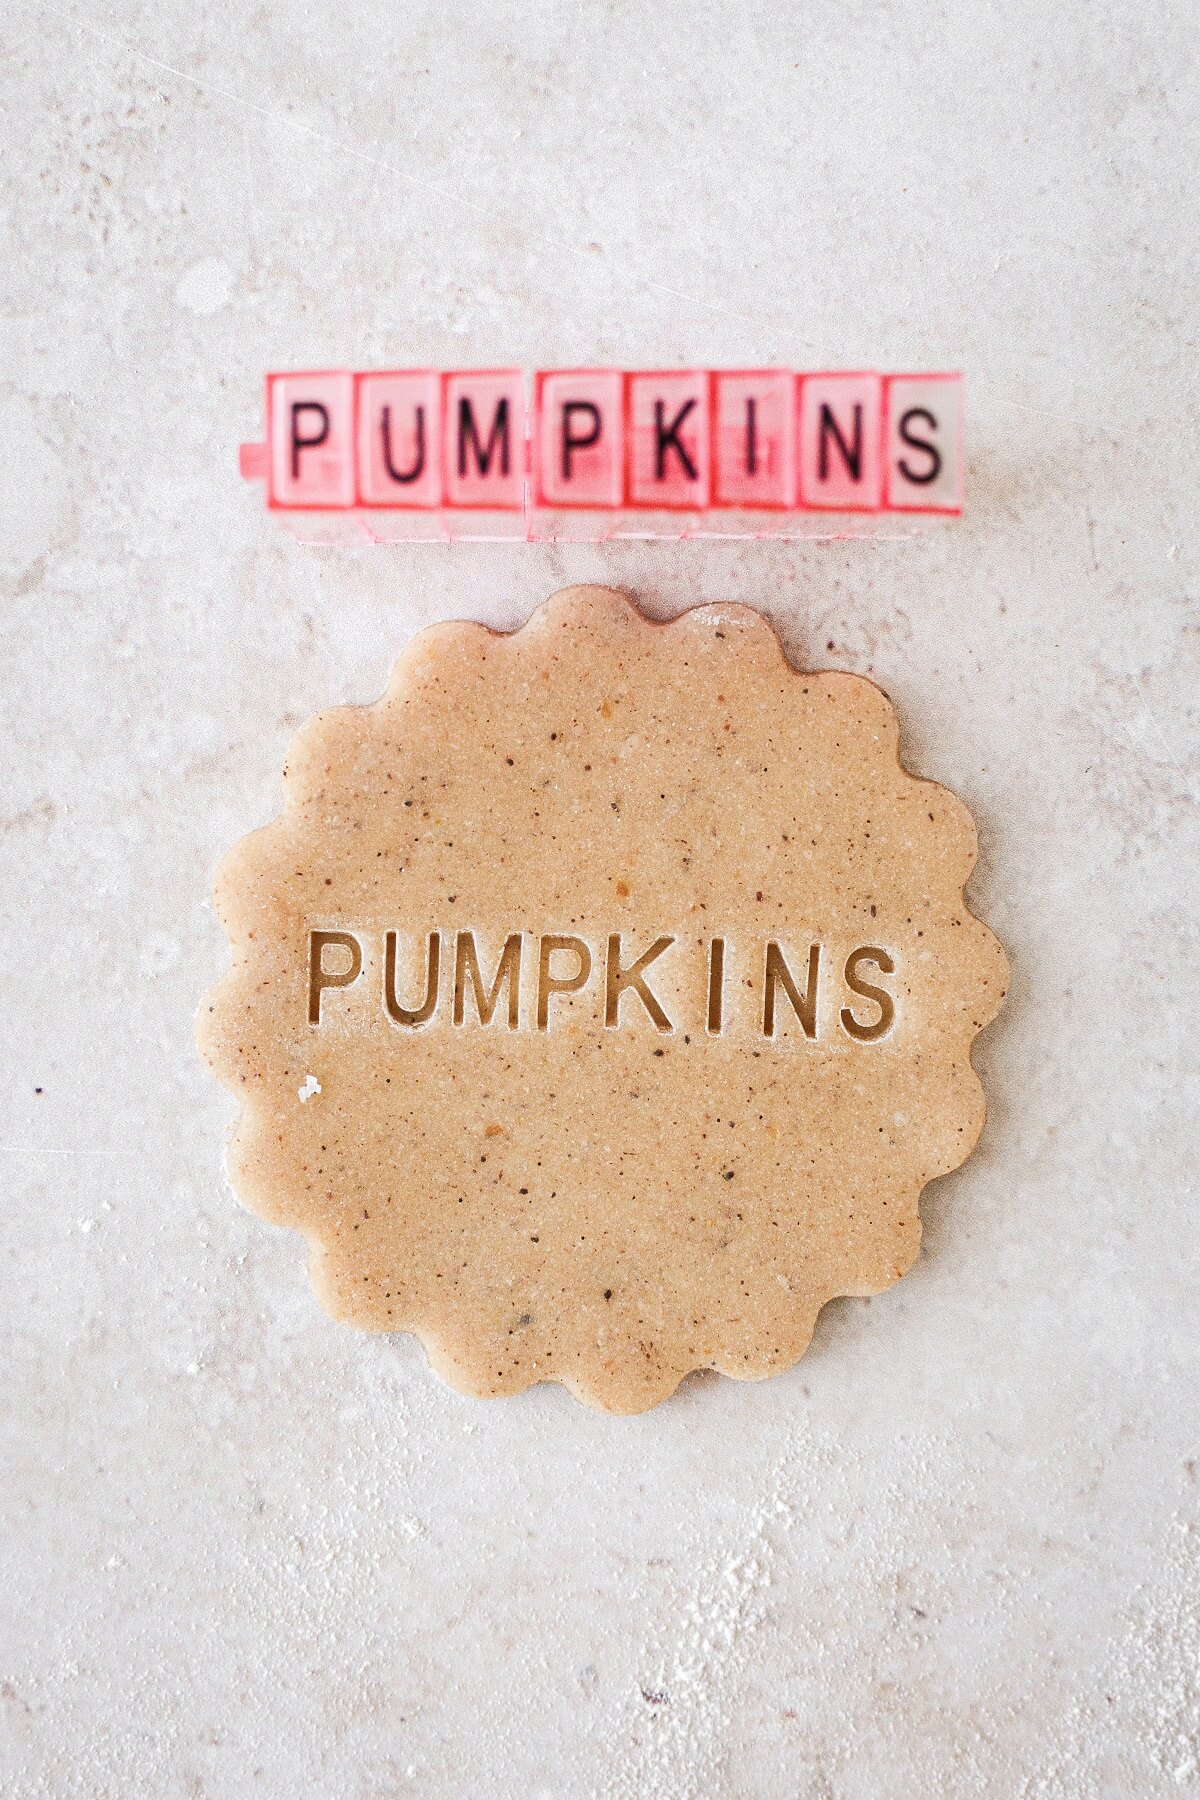 The word "pumpkins" stamped onto a cookie.